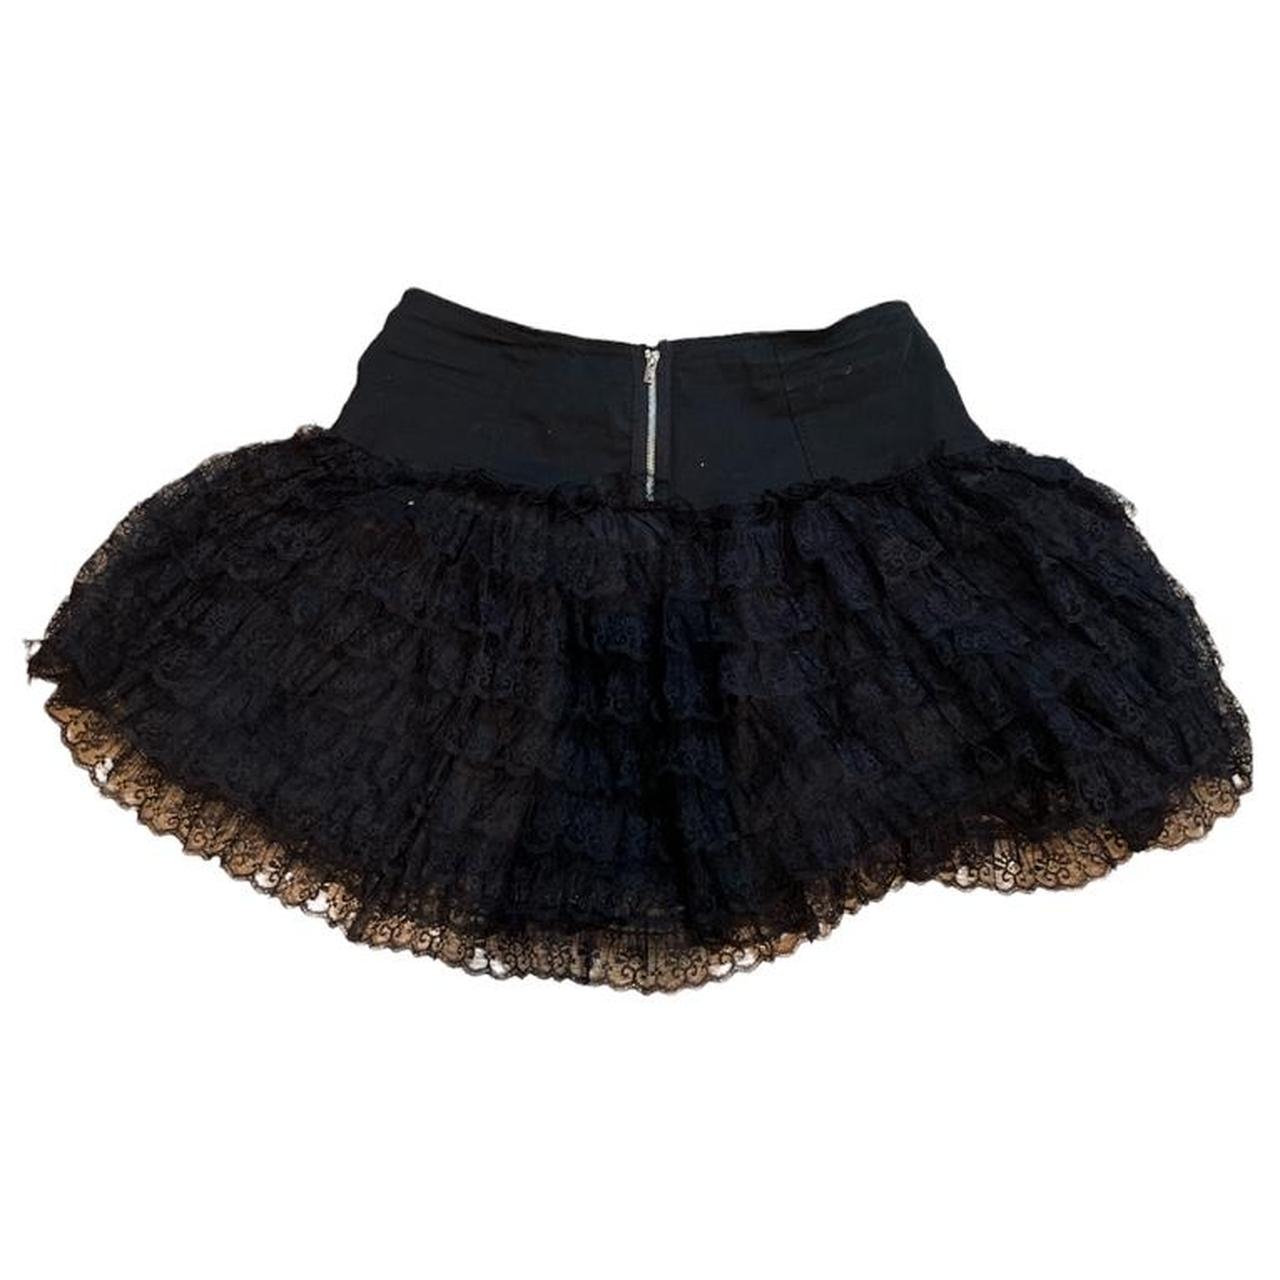 Tripp nyc tutu black lace skirt with metal skull and... - Depop